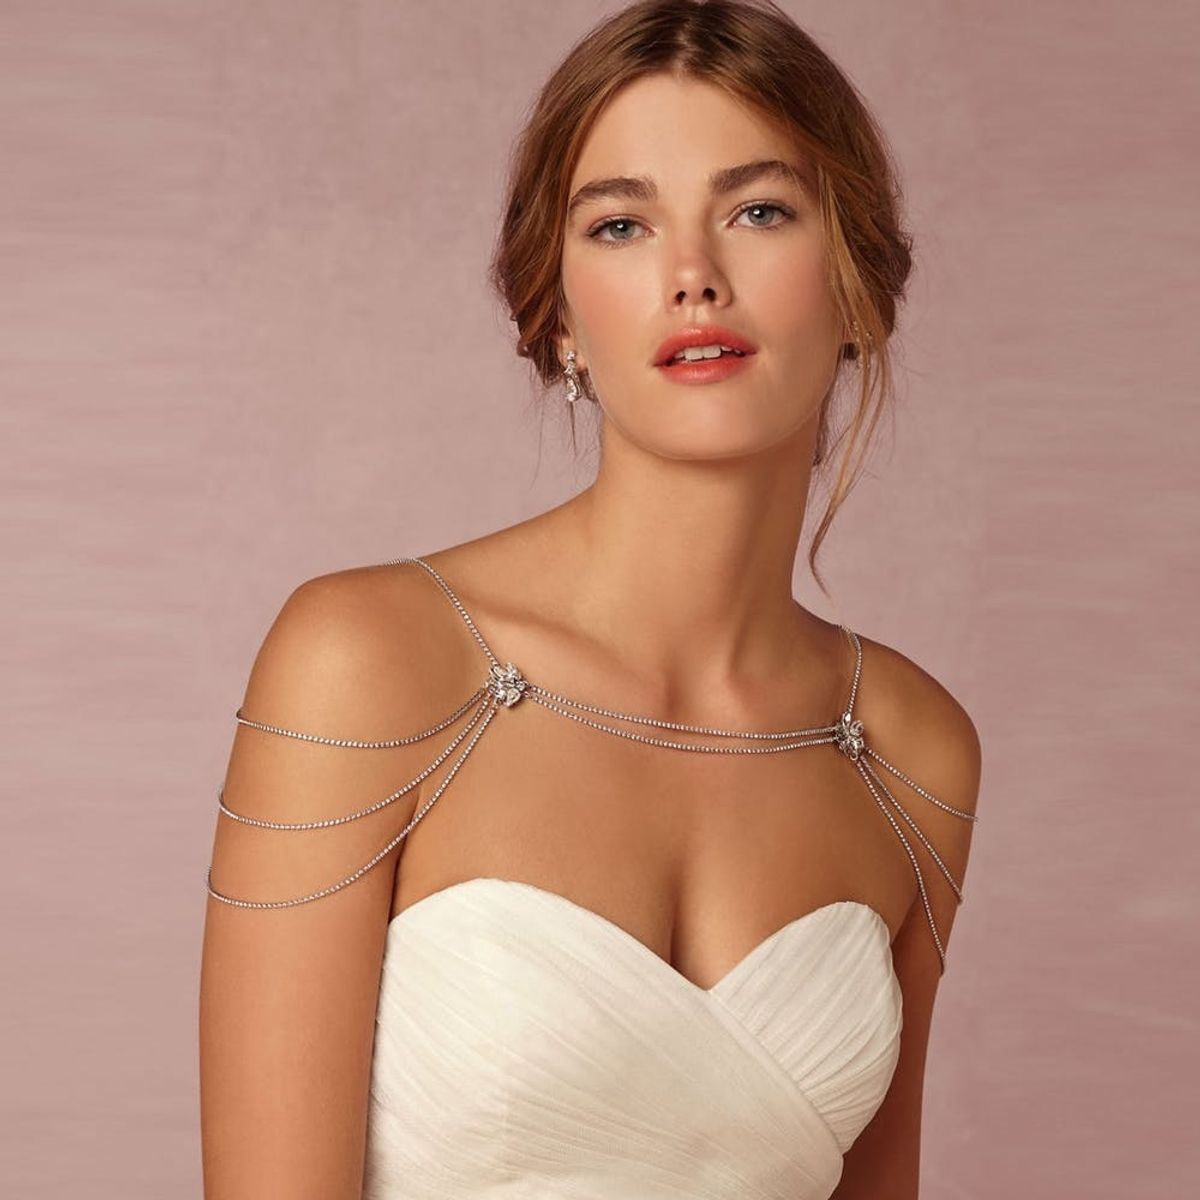 How to Choose the Right Jewelry for Your Wedding Dress